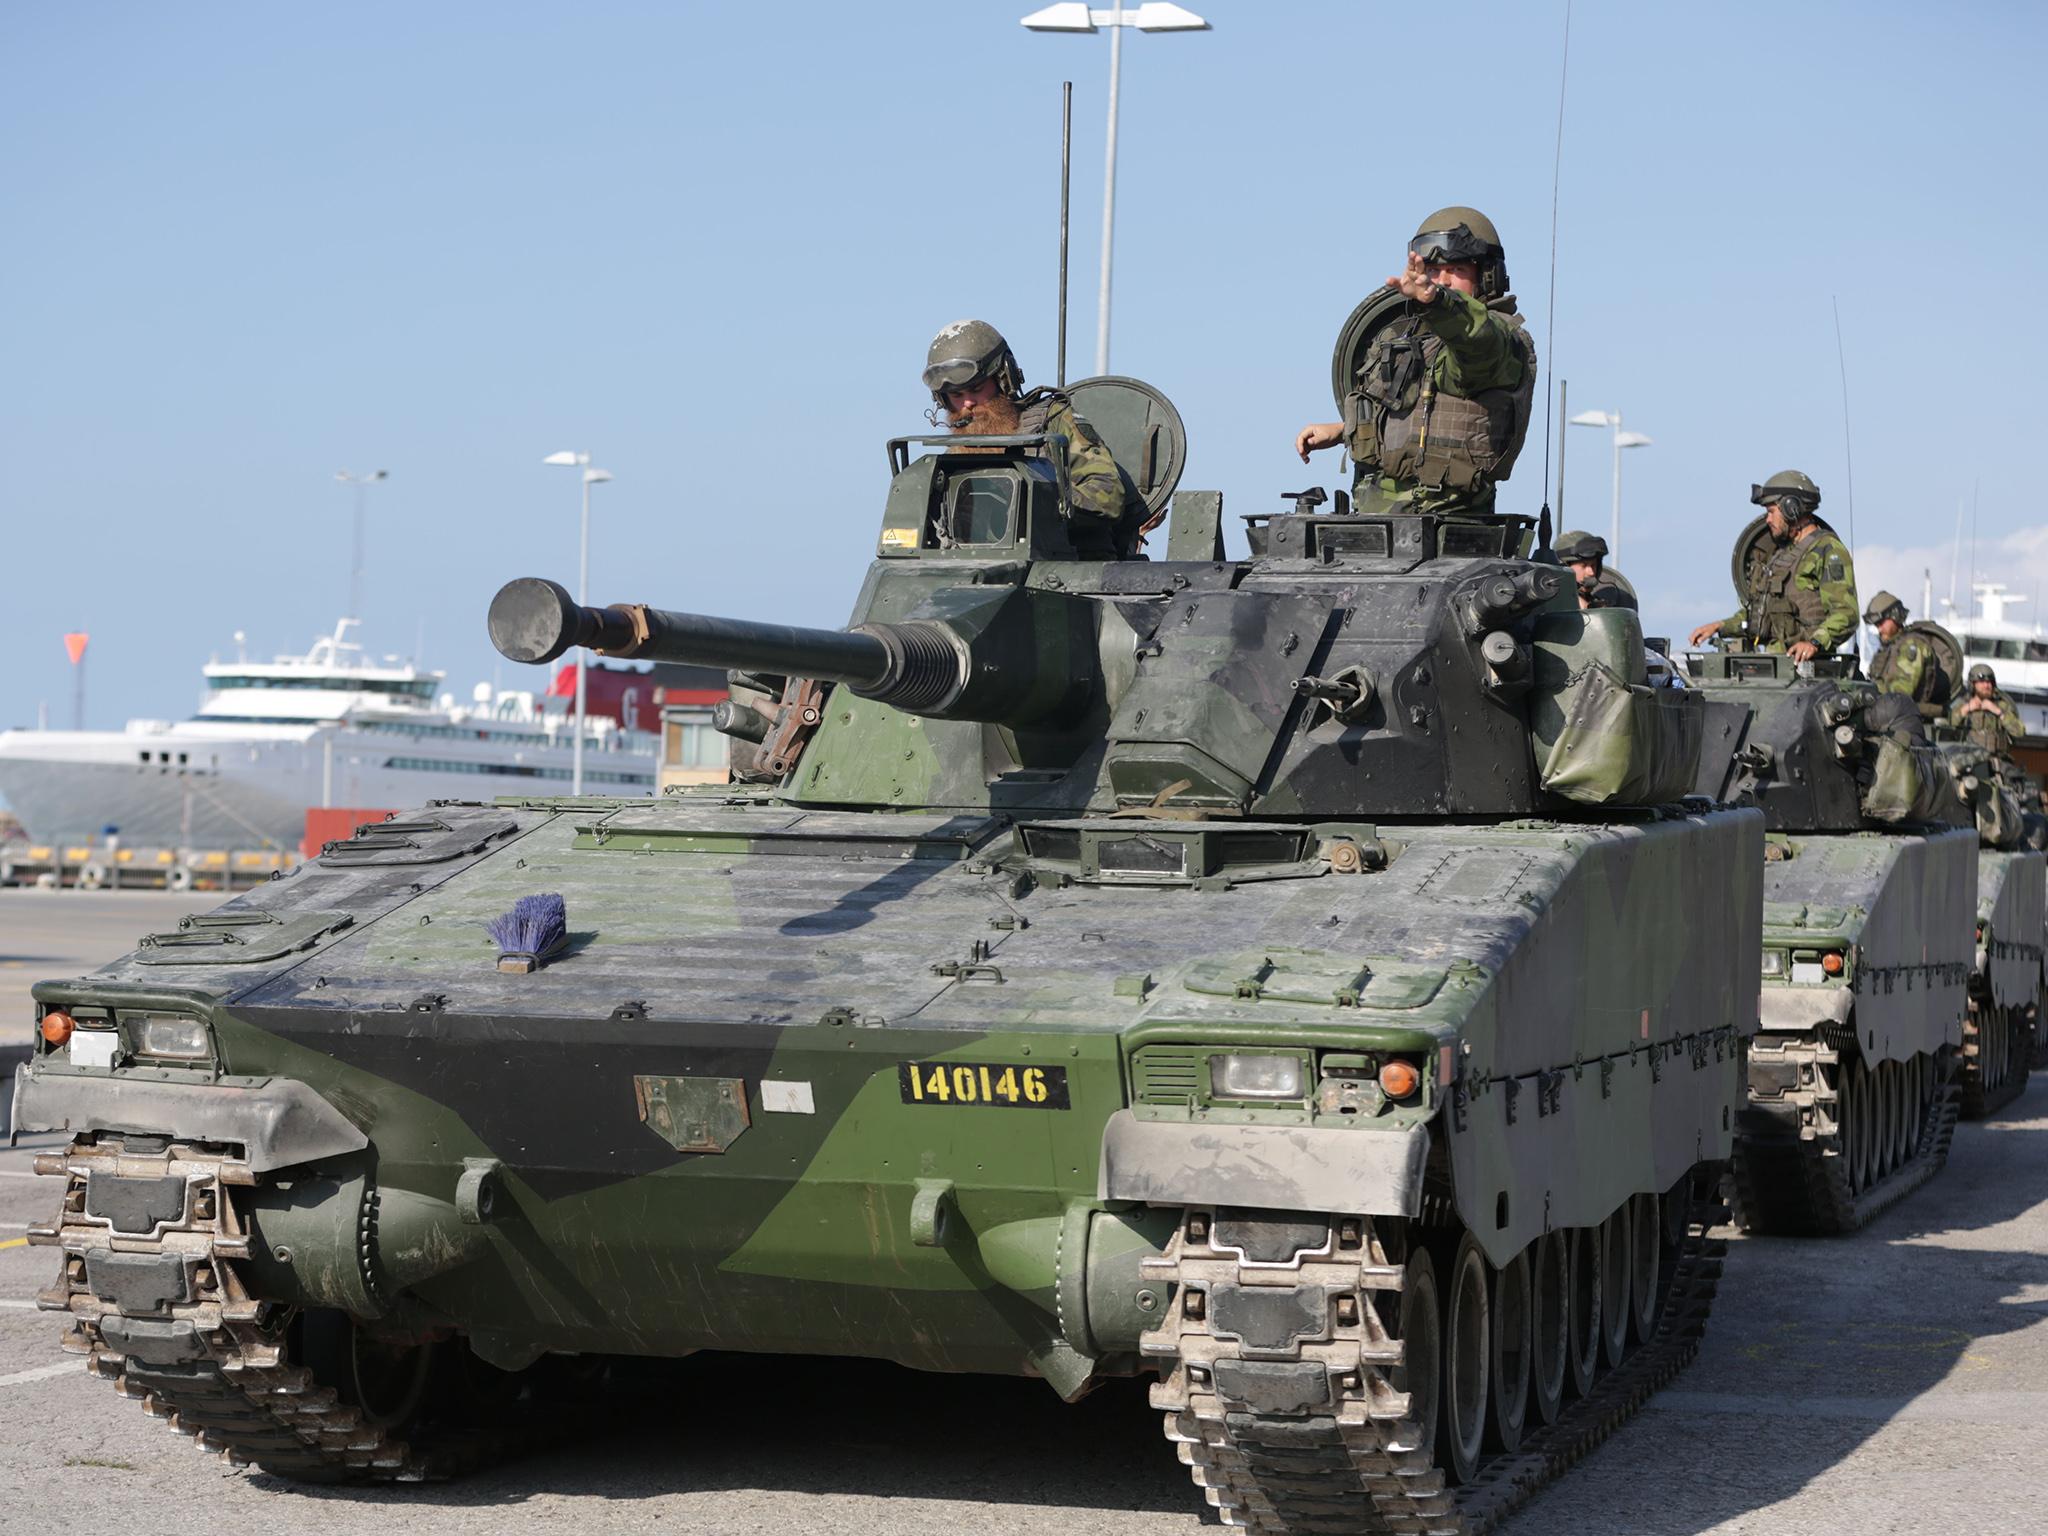 Gotland re-militarised an old Cold War base in early 2016 following tensions between Sweden and Russia